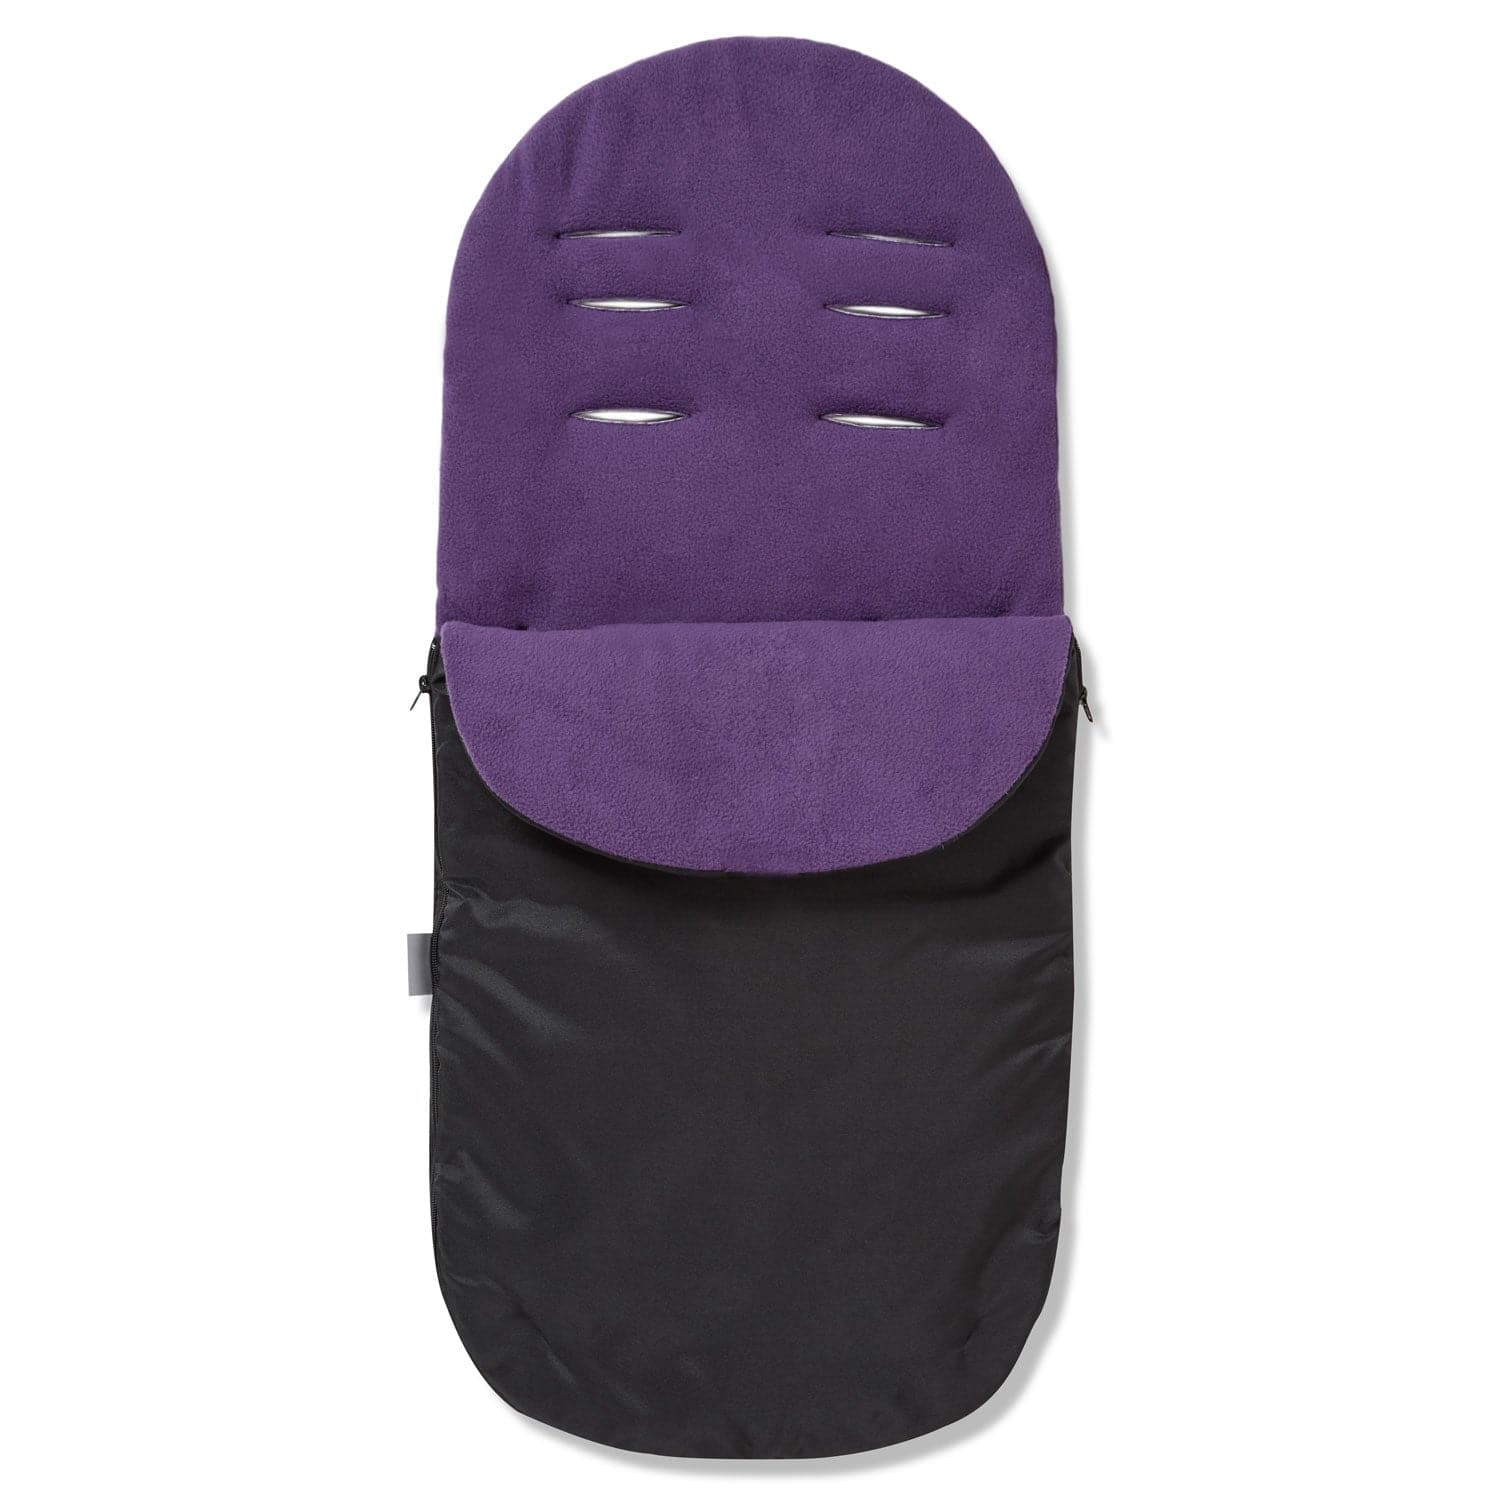 Footmuff / Cosy Toes Compatible with Uppababy - Purple / Fits All Models | For Your Little One